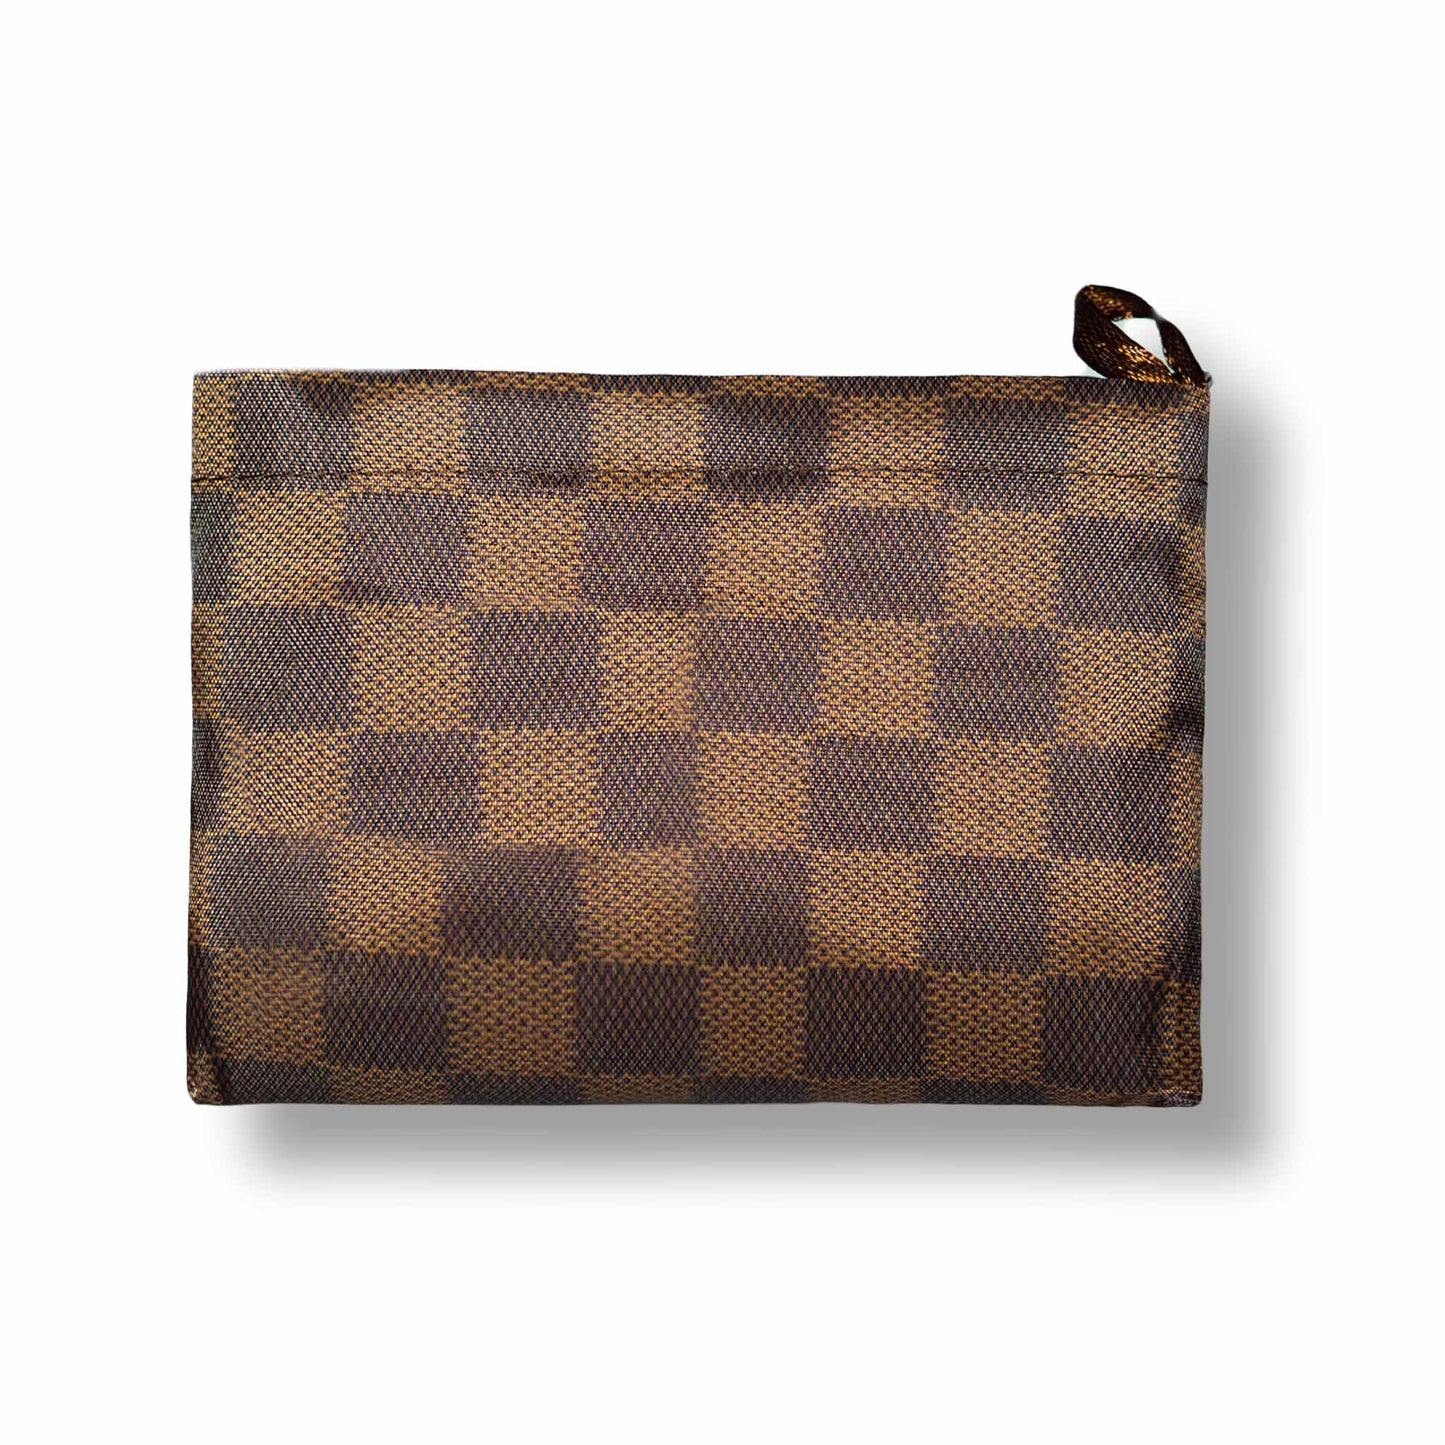 Tuck Away Chic Tote - Brown Patterned Tote Bag